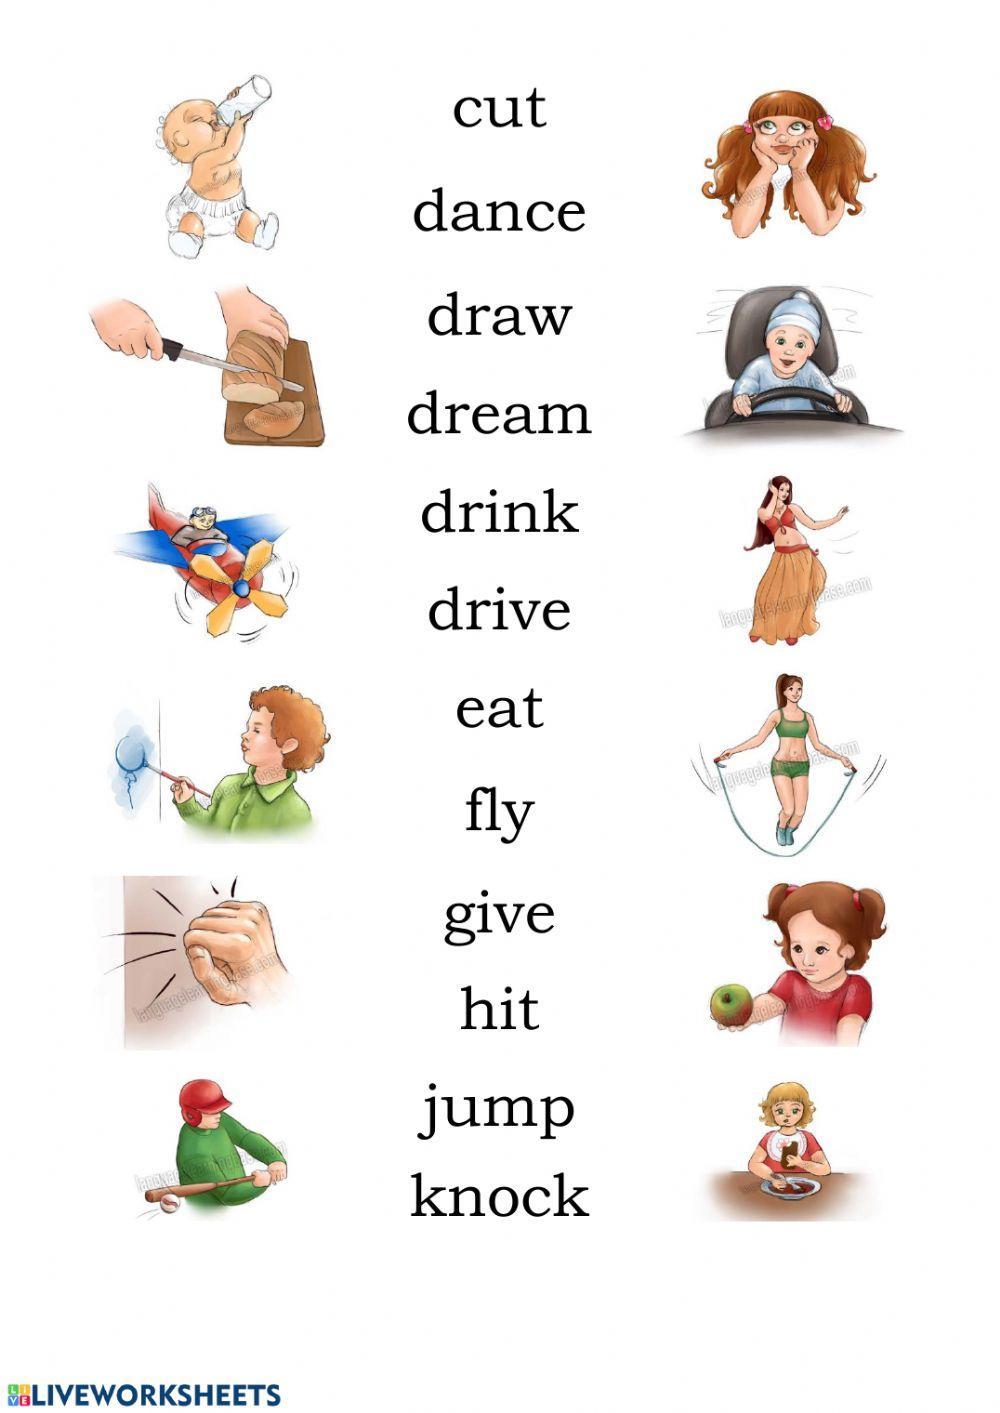 Verbs with pictures